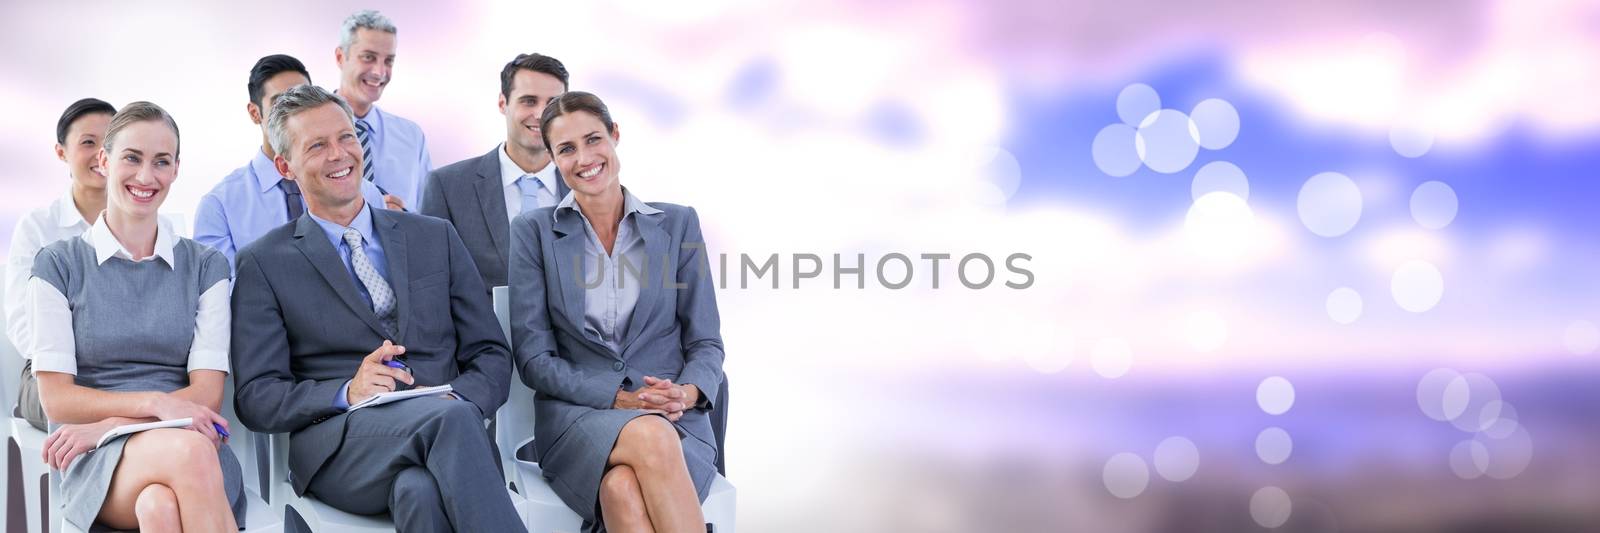 Digital composite of Business people and nature with flare light source